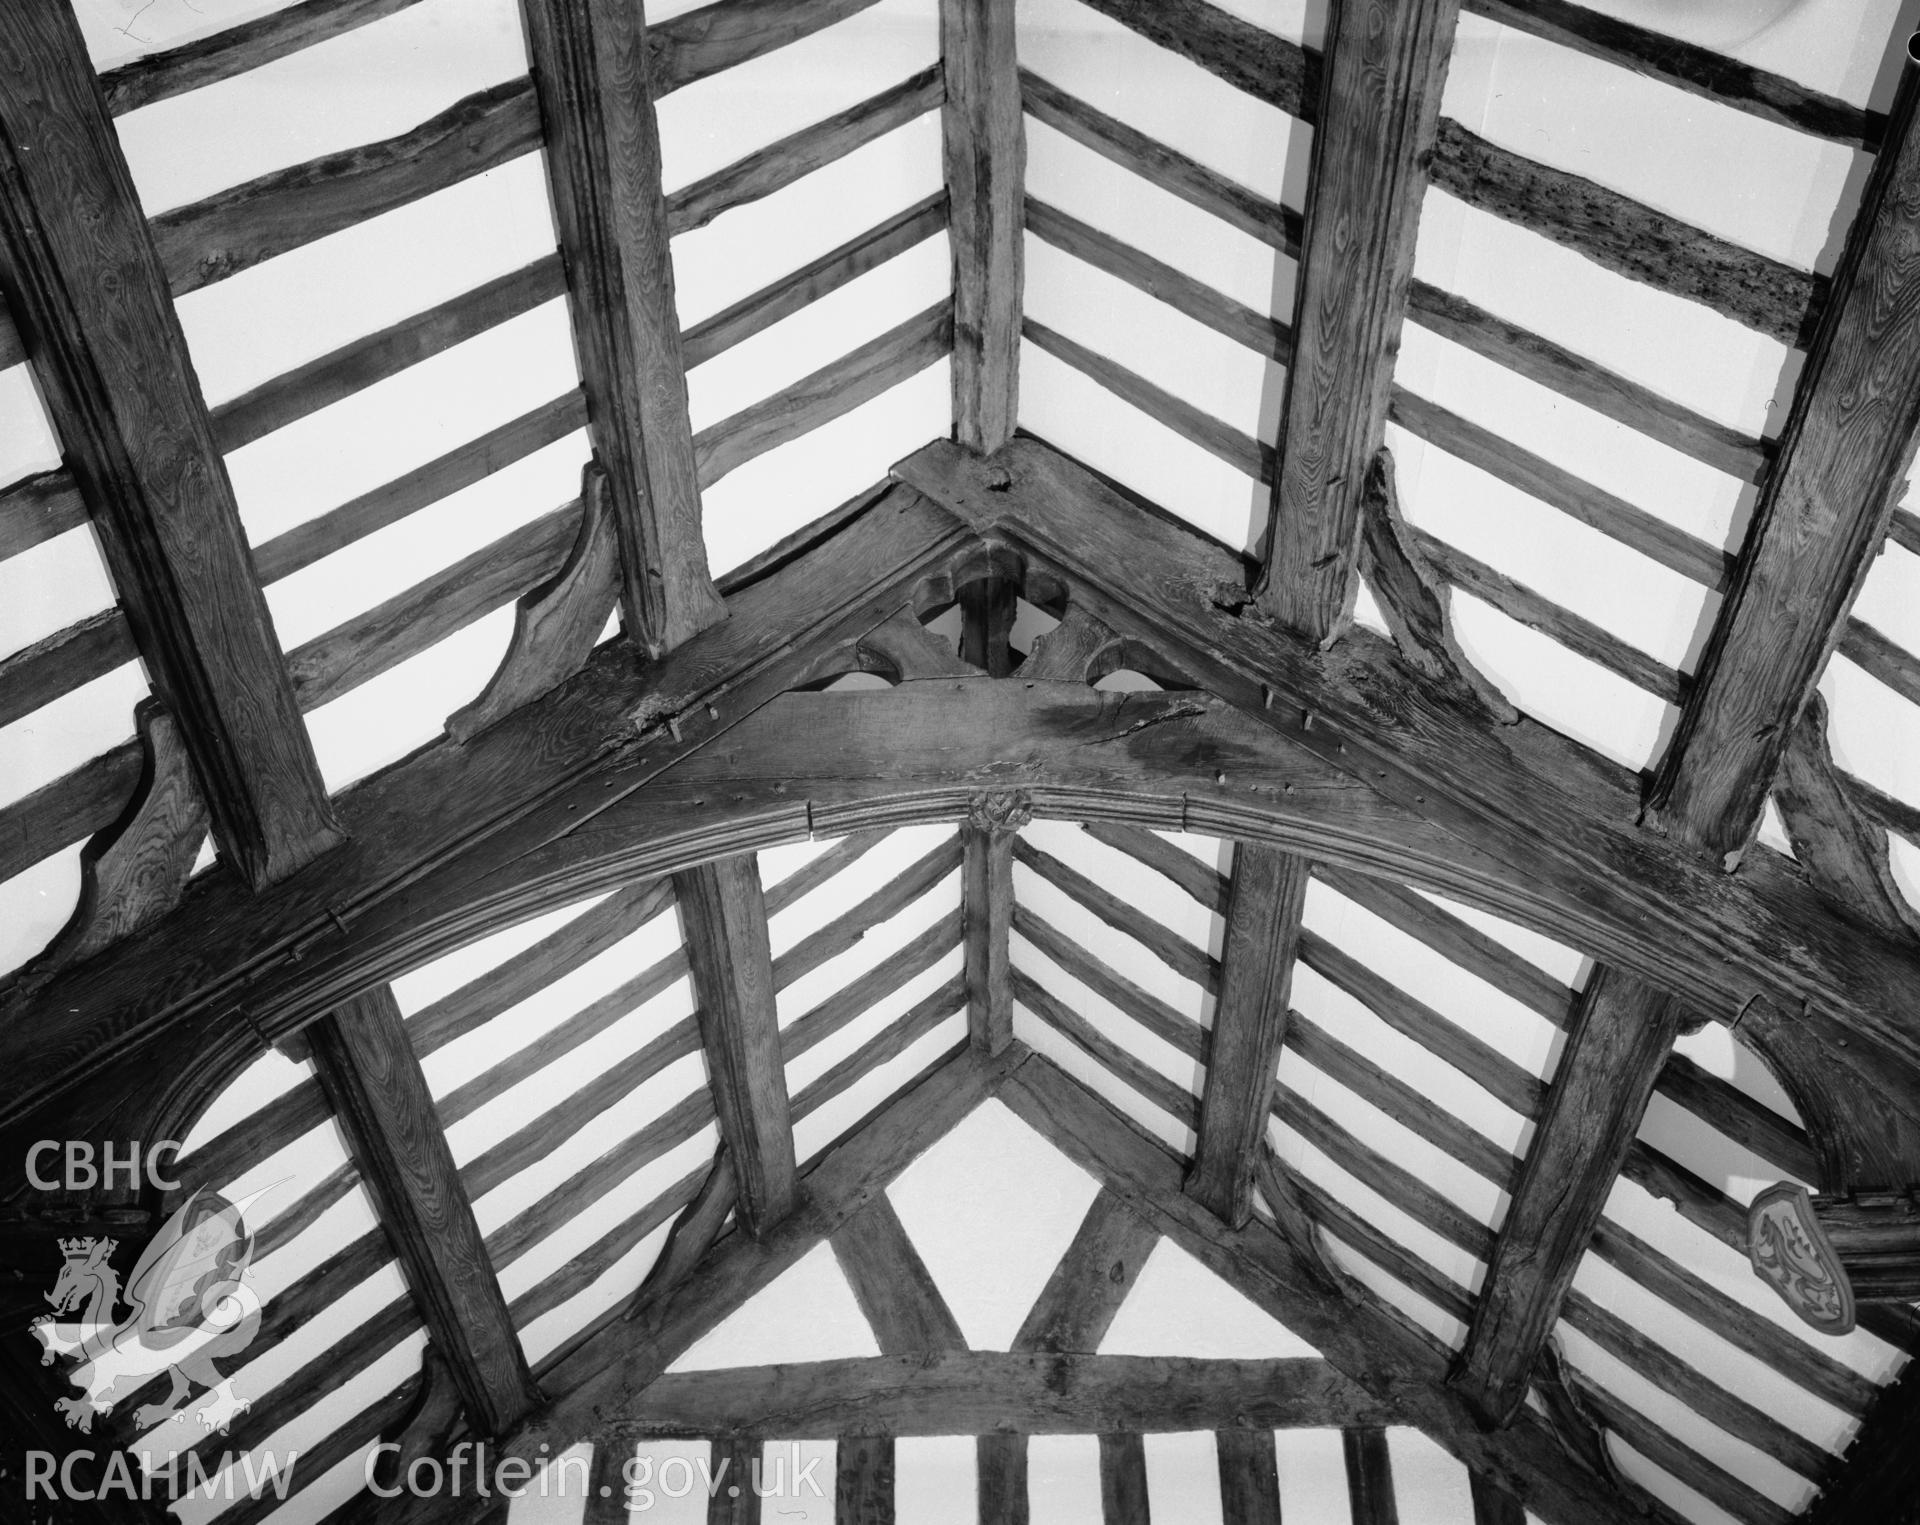 Interior view showing roof timbers.